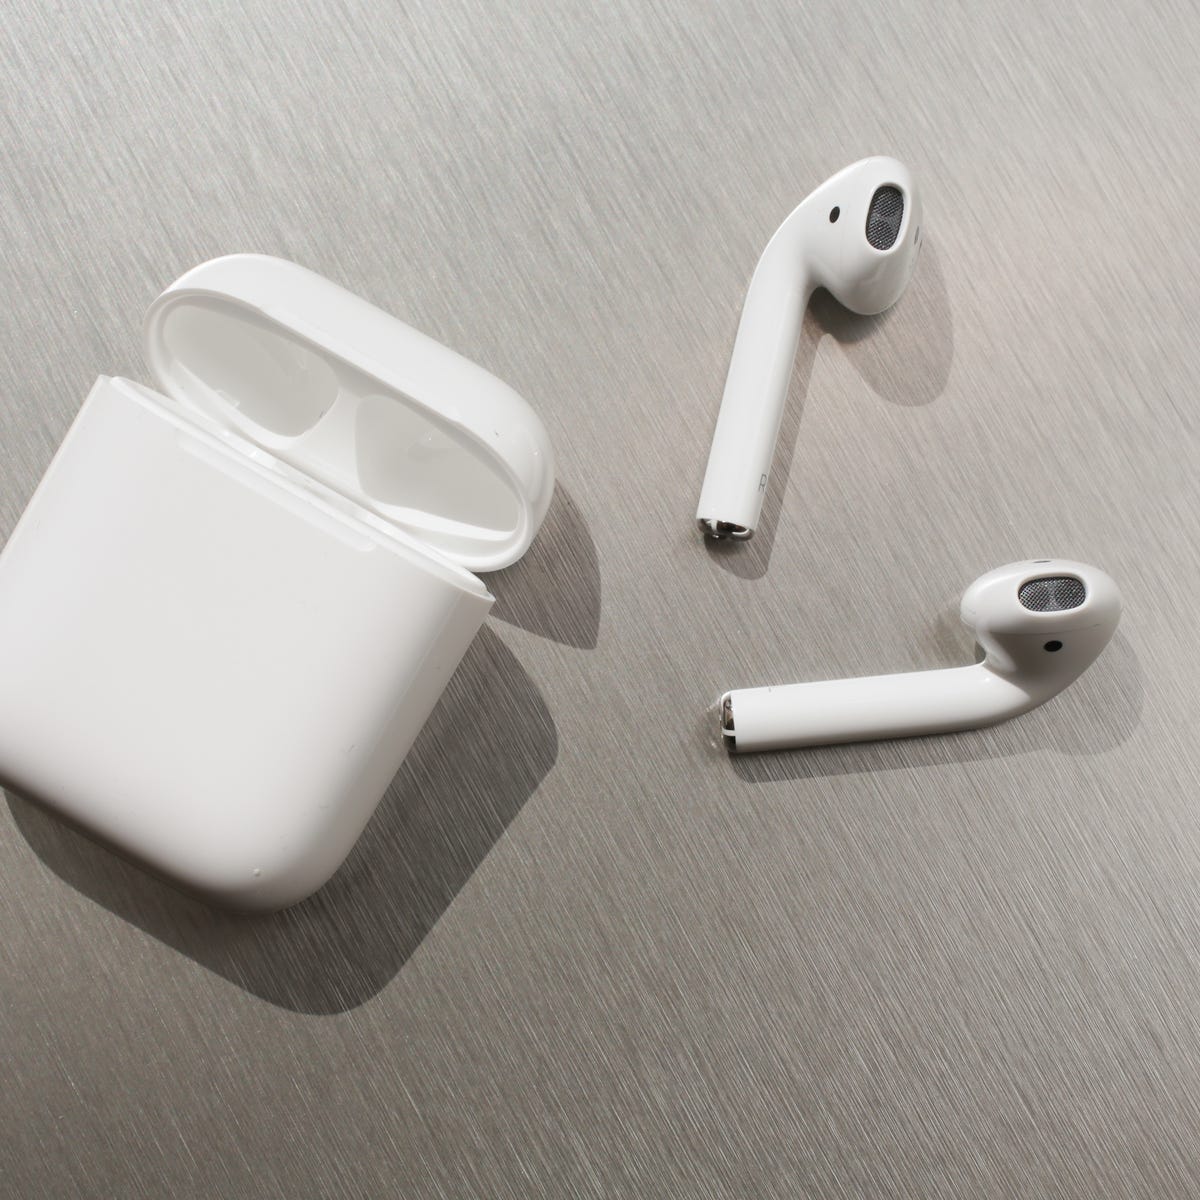 Faktisk tack Forbipasserende Apple AirPods review: Apple's AirPods have improved with time - CNET